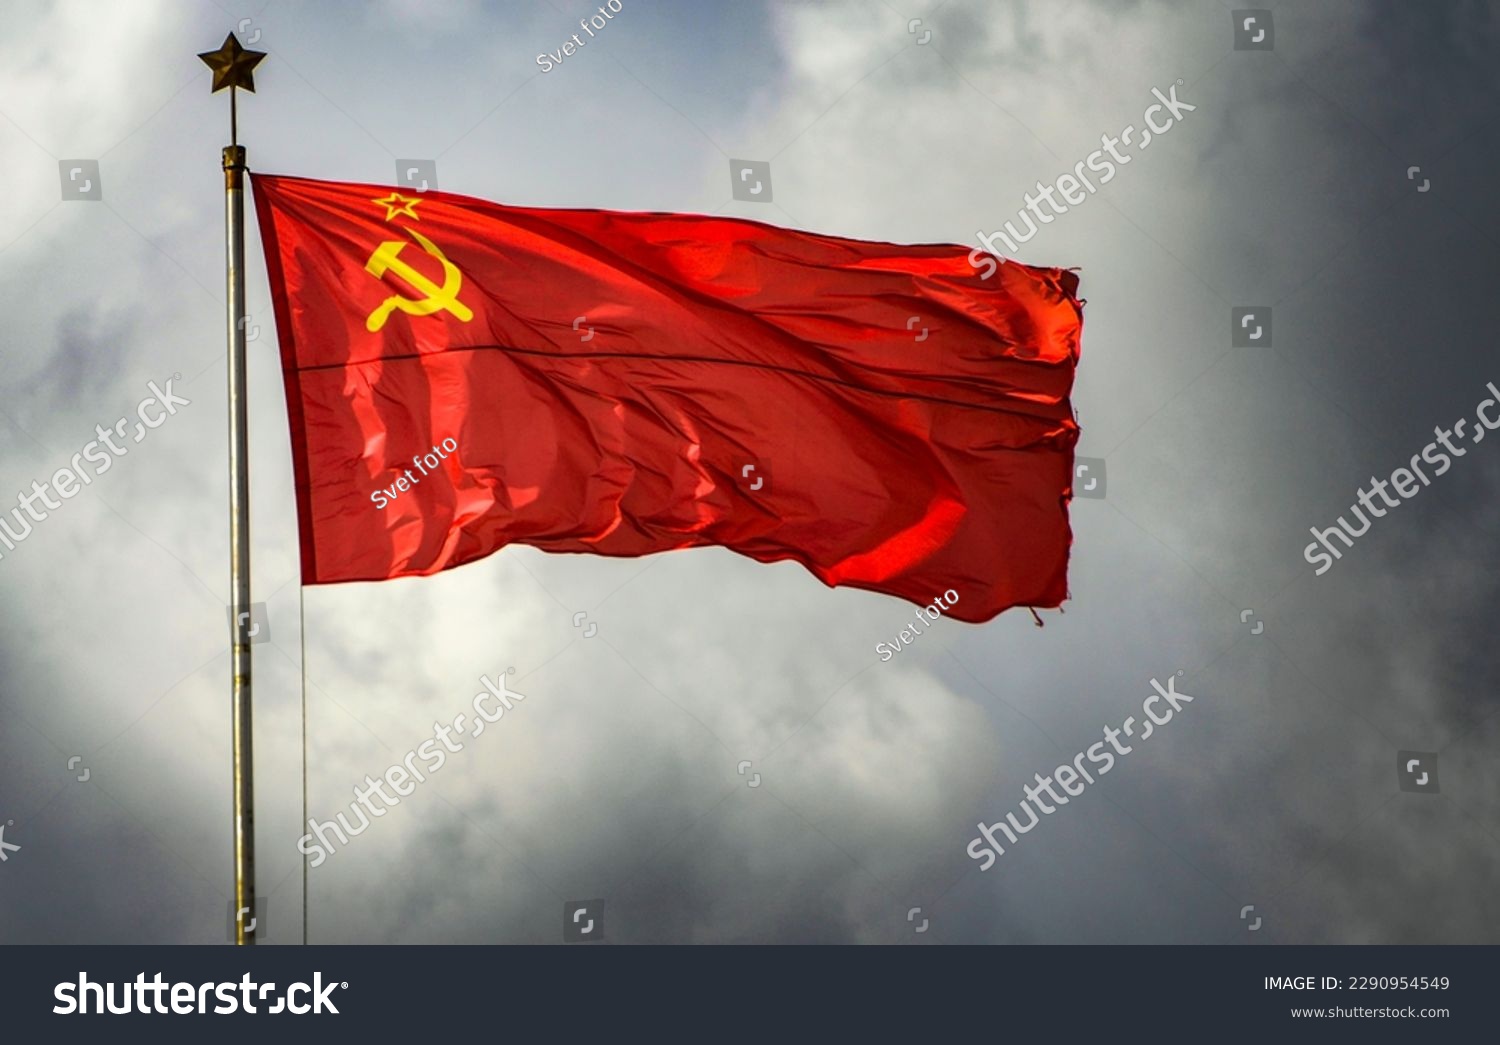  Flag of the Soviet Union. Russia is trying to restore the Soviet Union #2290954549